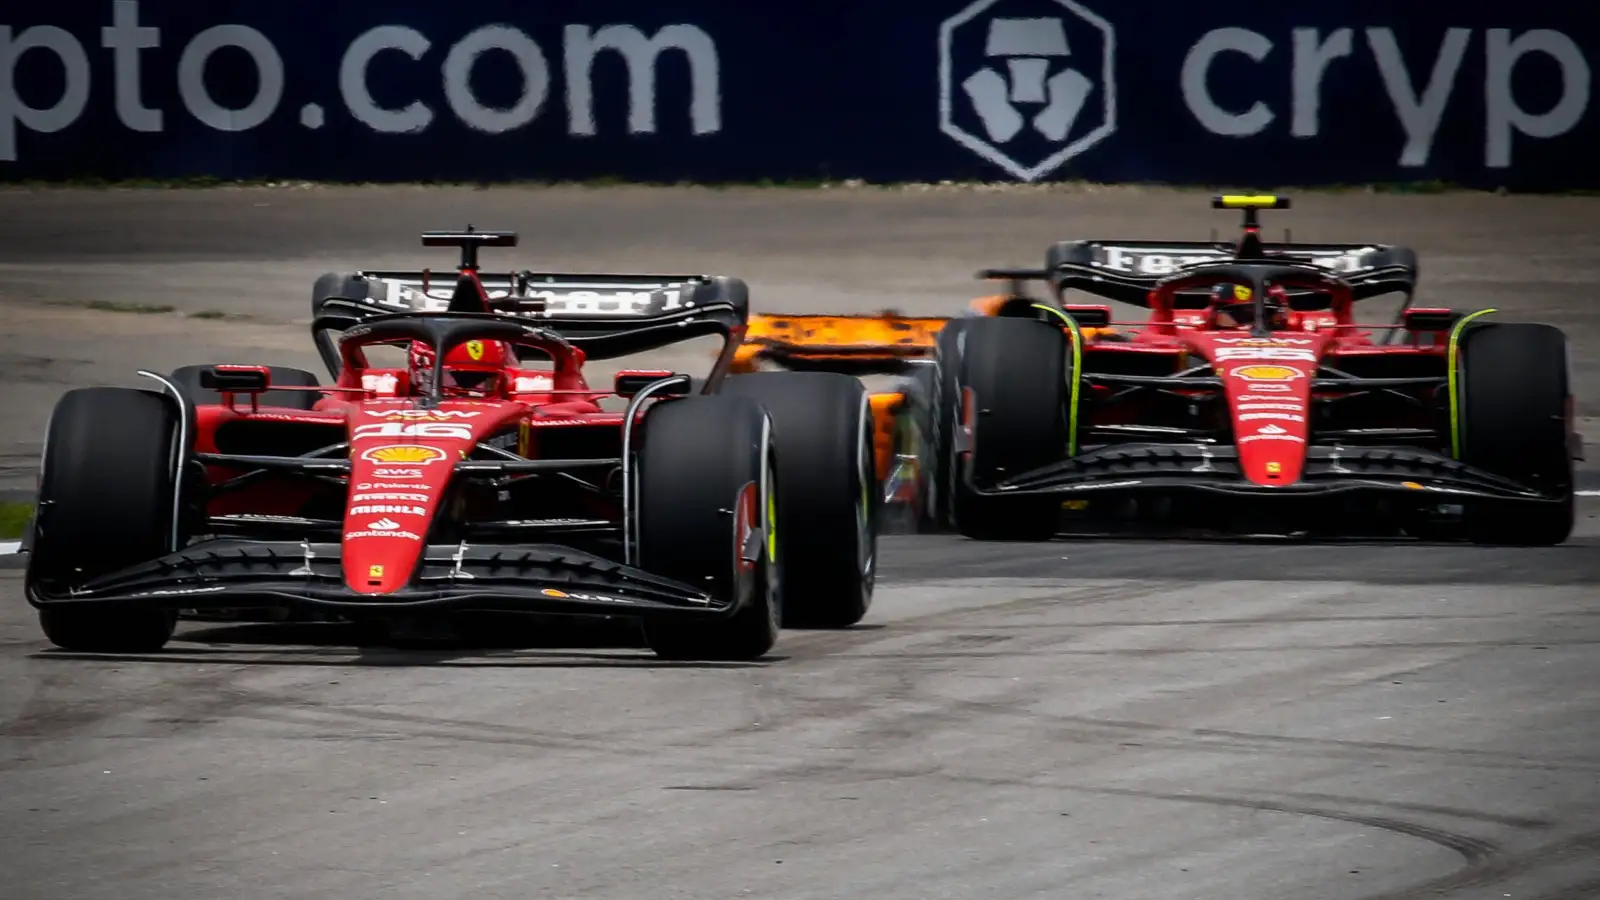 Ferrari drivers Charles Leclerc and Carlos Sainz out on track.